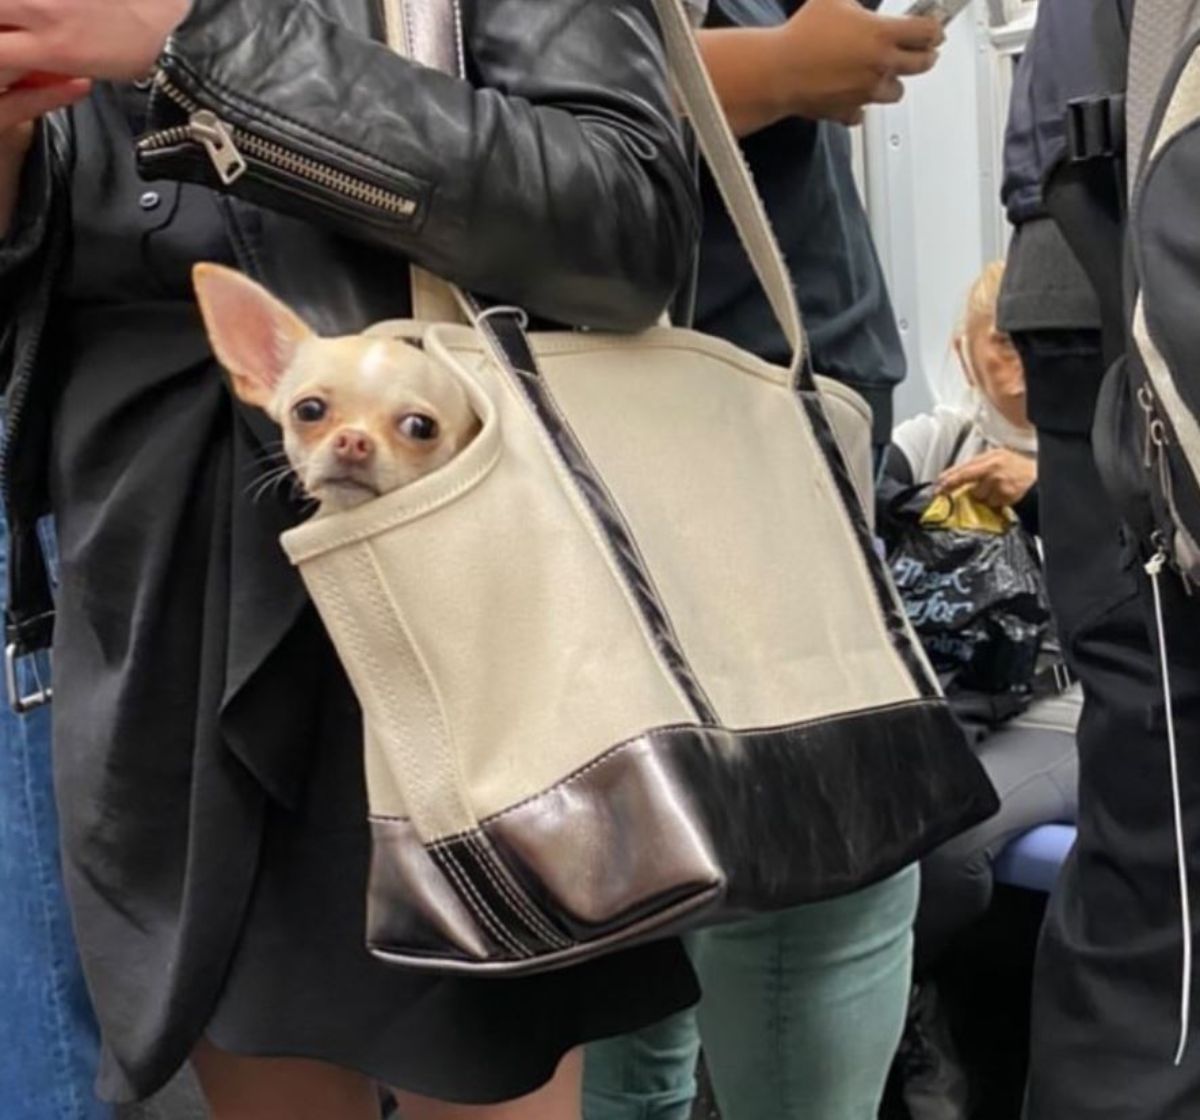 small brown dog in a brown and white bag with its head sticking out being carried by someone